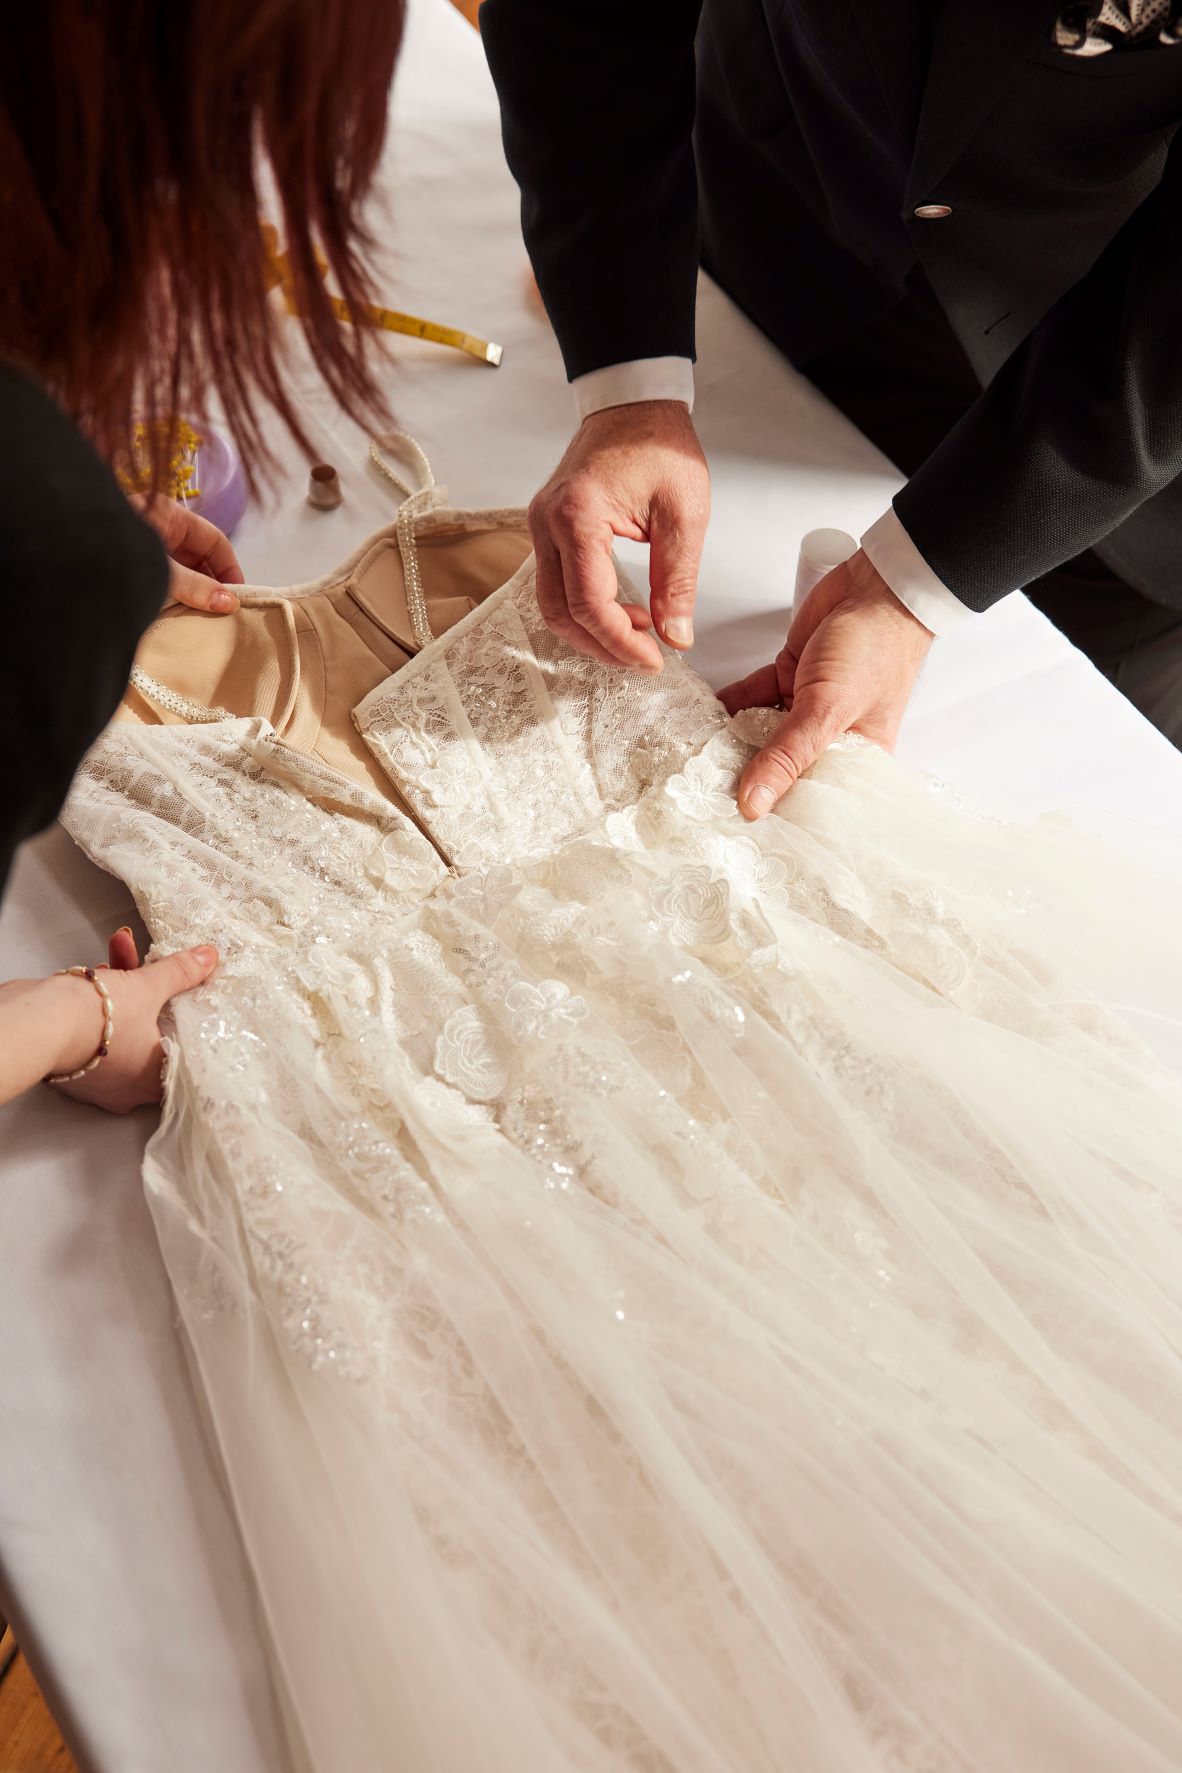 Do You Have to Get Your Wedding Dress Altered?